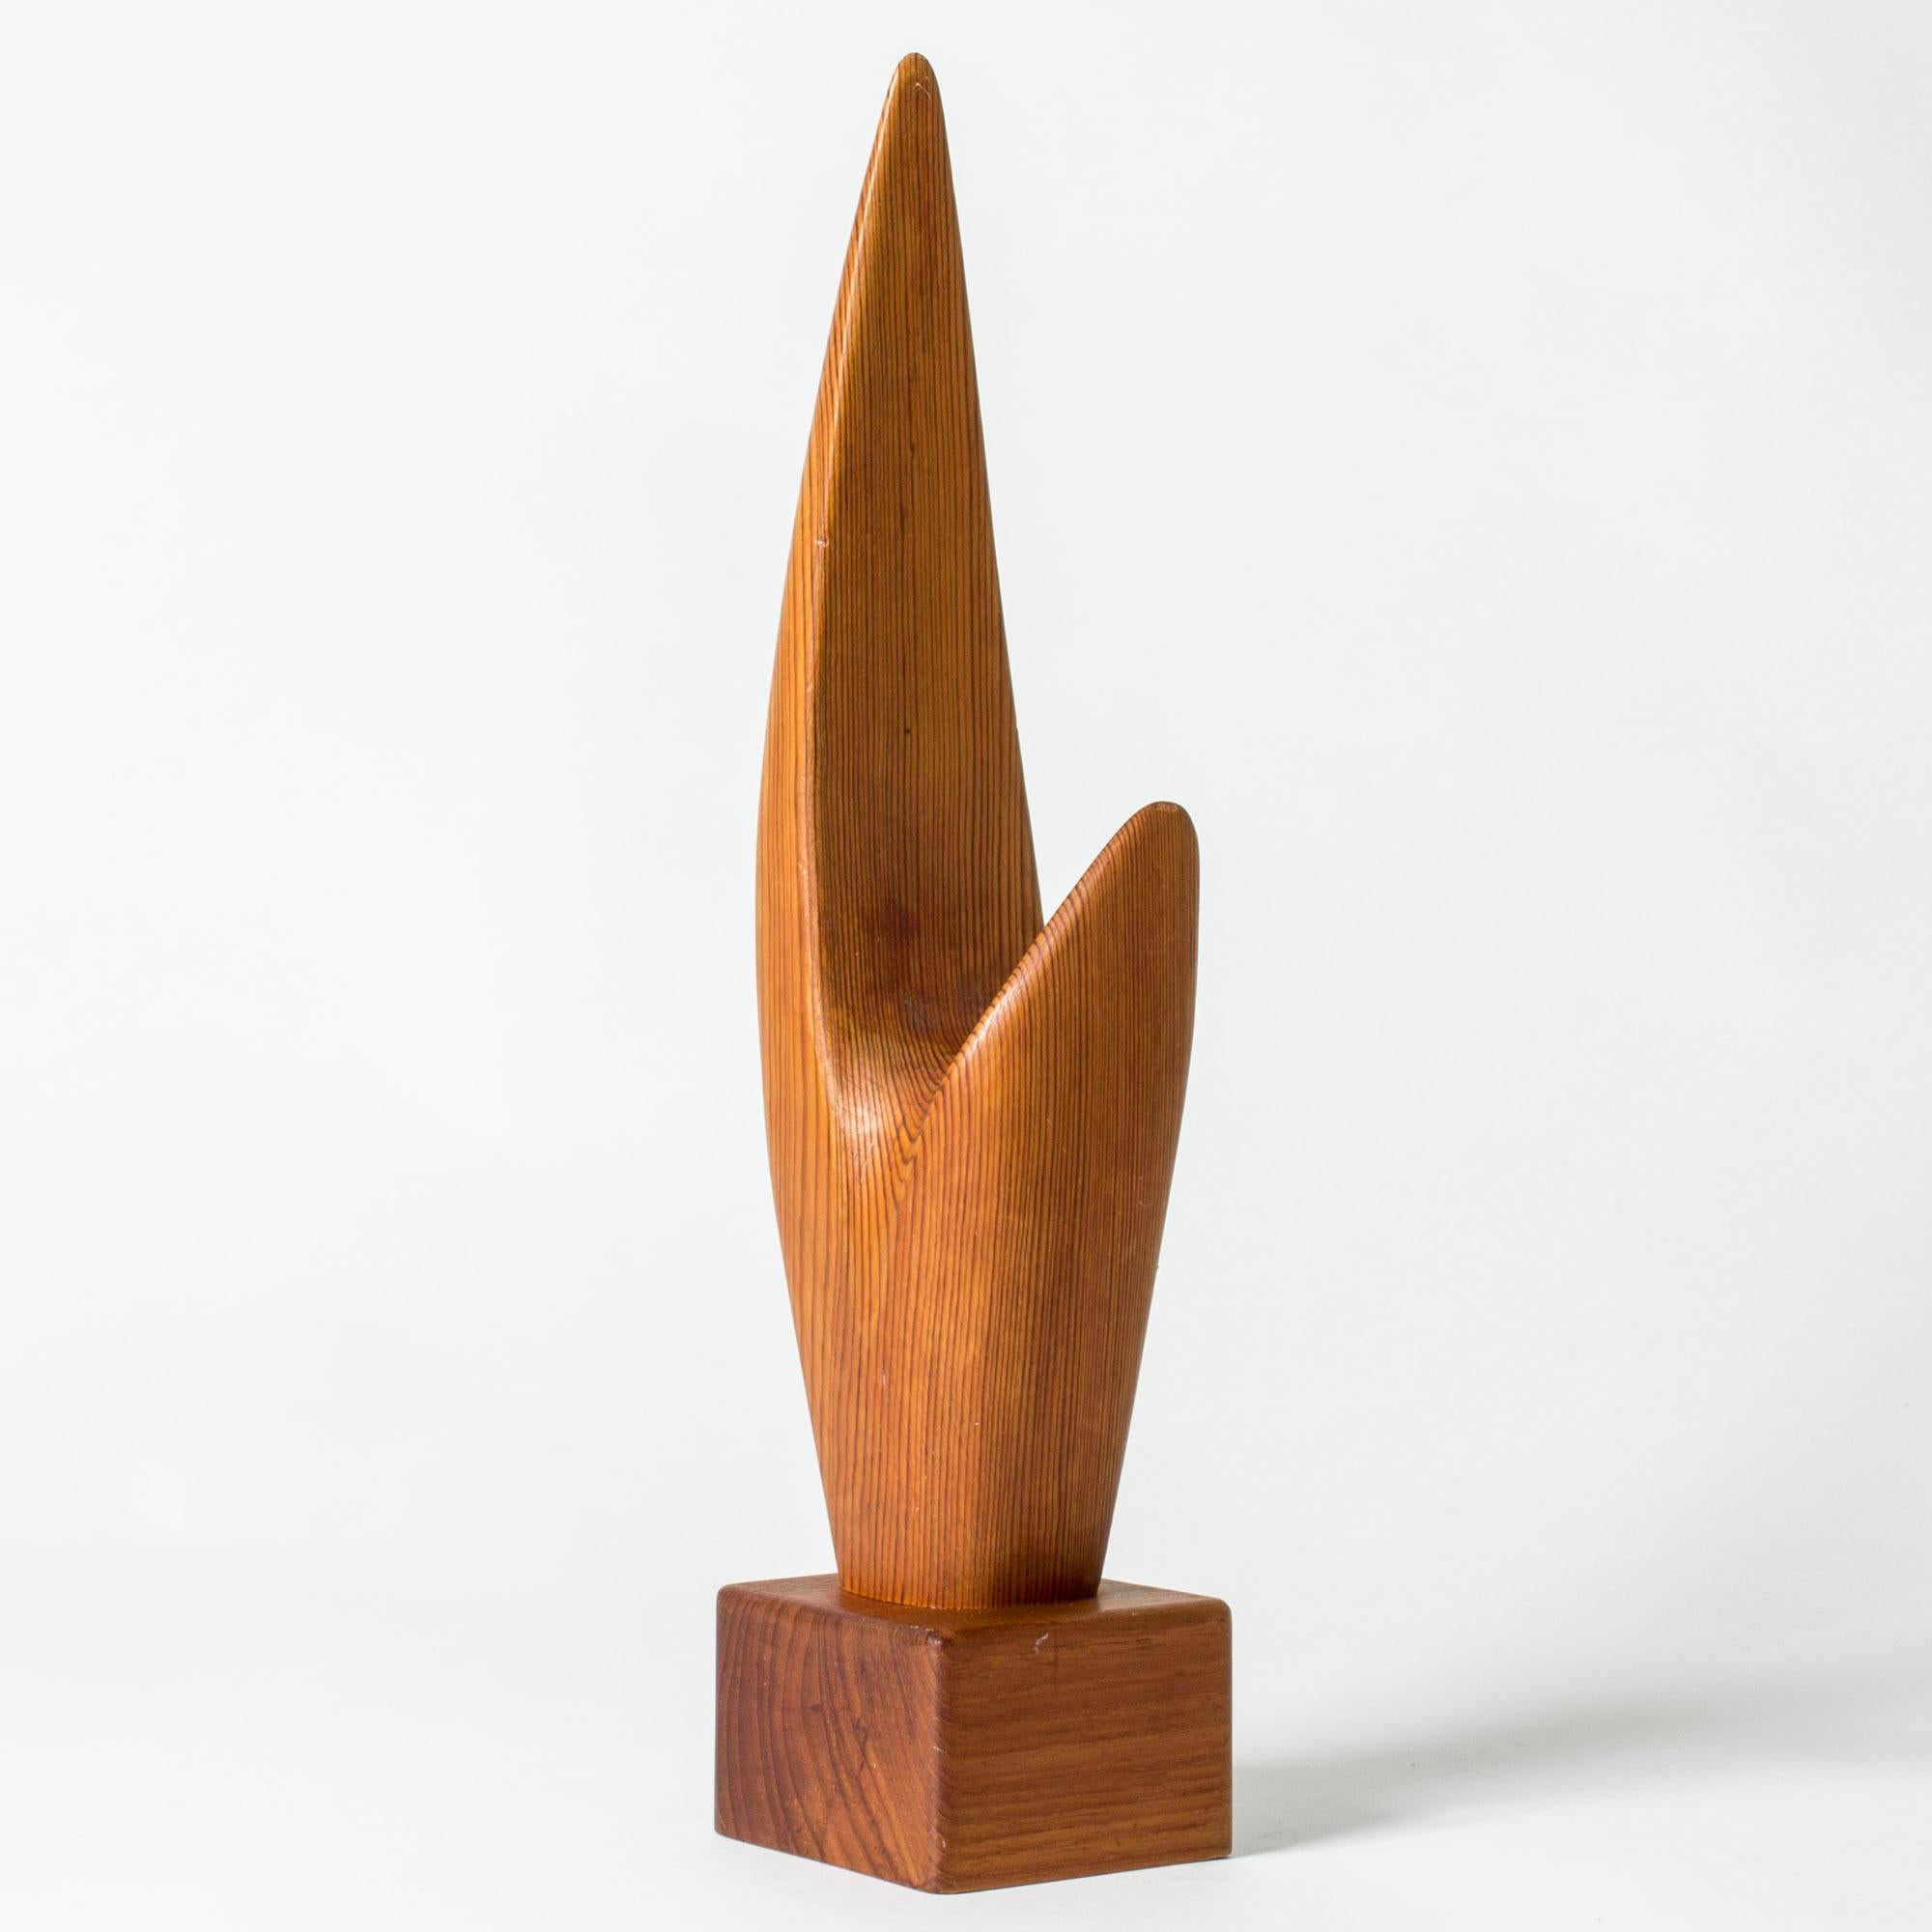 Striking wooden sculpture by Johnny Mattsson, in an abstract form. Pine on a teak base. The form of the sculpture follows the pine woodgrain in a beautiful way.